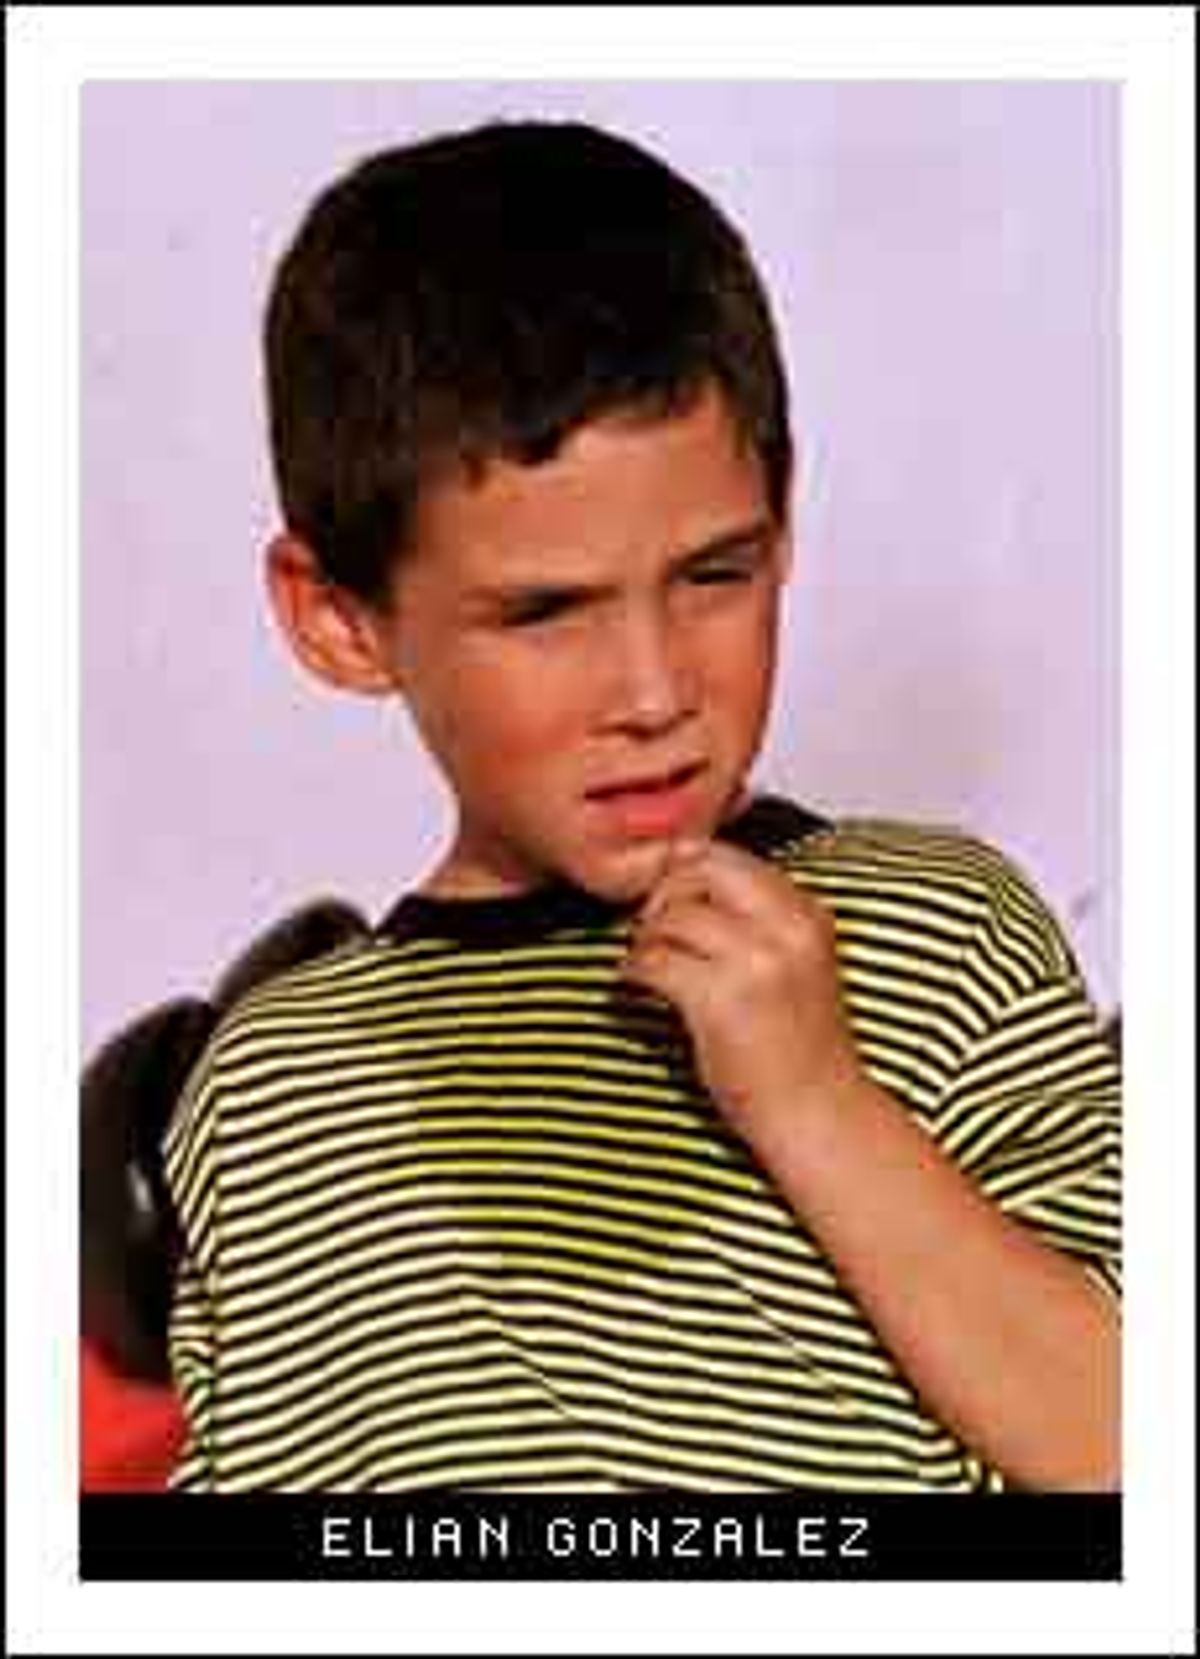 Five-year-old Elian Gonzalez is shown at his new home in Miami, Tuesday, Nov. 30, 1999. Gonzalez fled Cuba with his mother and stepfather in a small powerboat that sank during the 90-mile crossing to Florida. Nine people died, including his mother and stepfather. Elian was found alone Thanksgiving Day, clinging to inner tubes off the Florida coast near Fort Lauderdale. Days after he was rescued off the coast of Florida, Elian is starting to ask questions about his future, now caught in a political tug-of-war between Cuba and the United States. (AP Photo/Alan Diaz) (Associated Press)